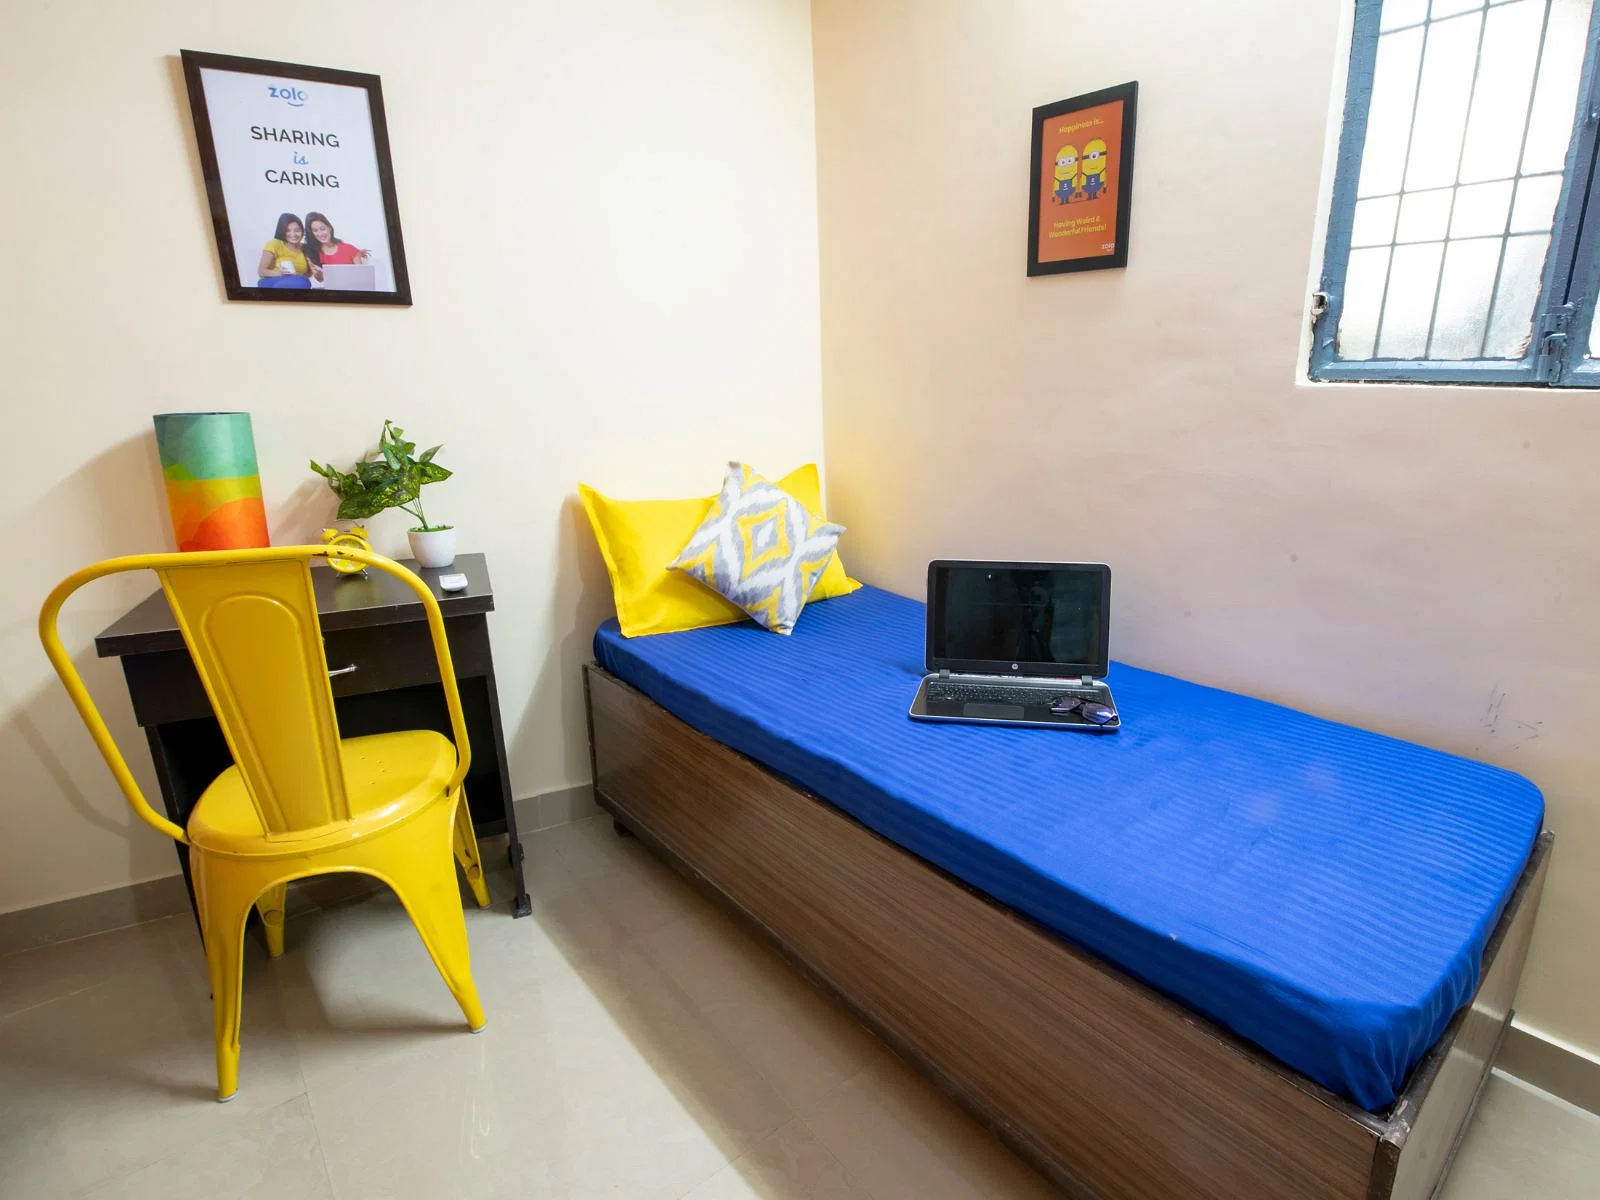 Comfortable and affordable Zolo PGs in Satya Niketan for students and working professionals-sign up-Zolo Amigos